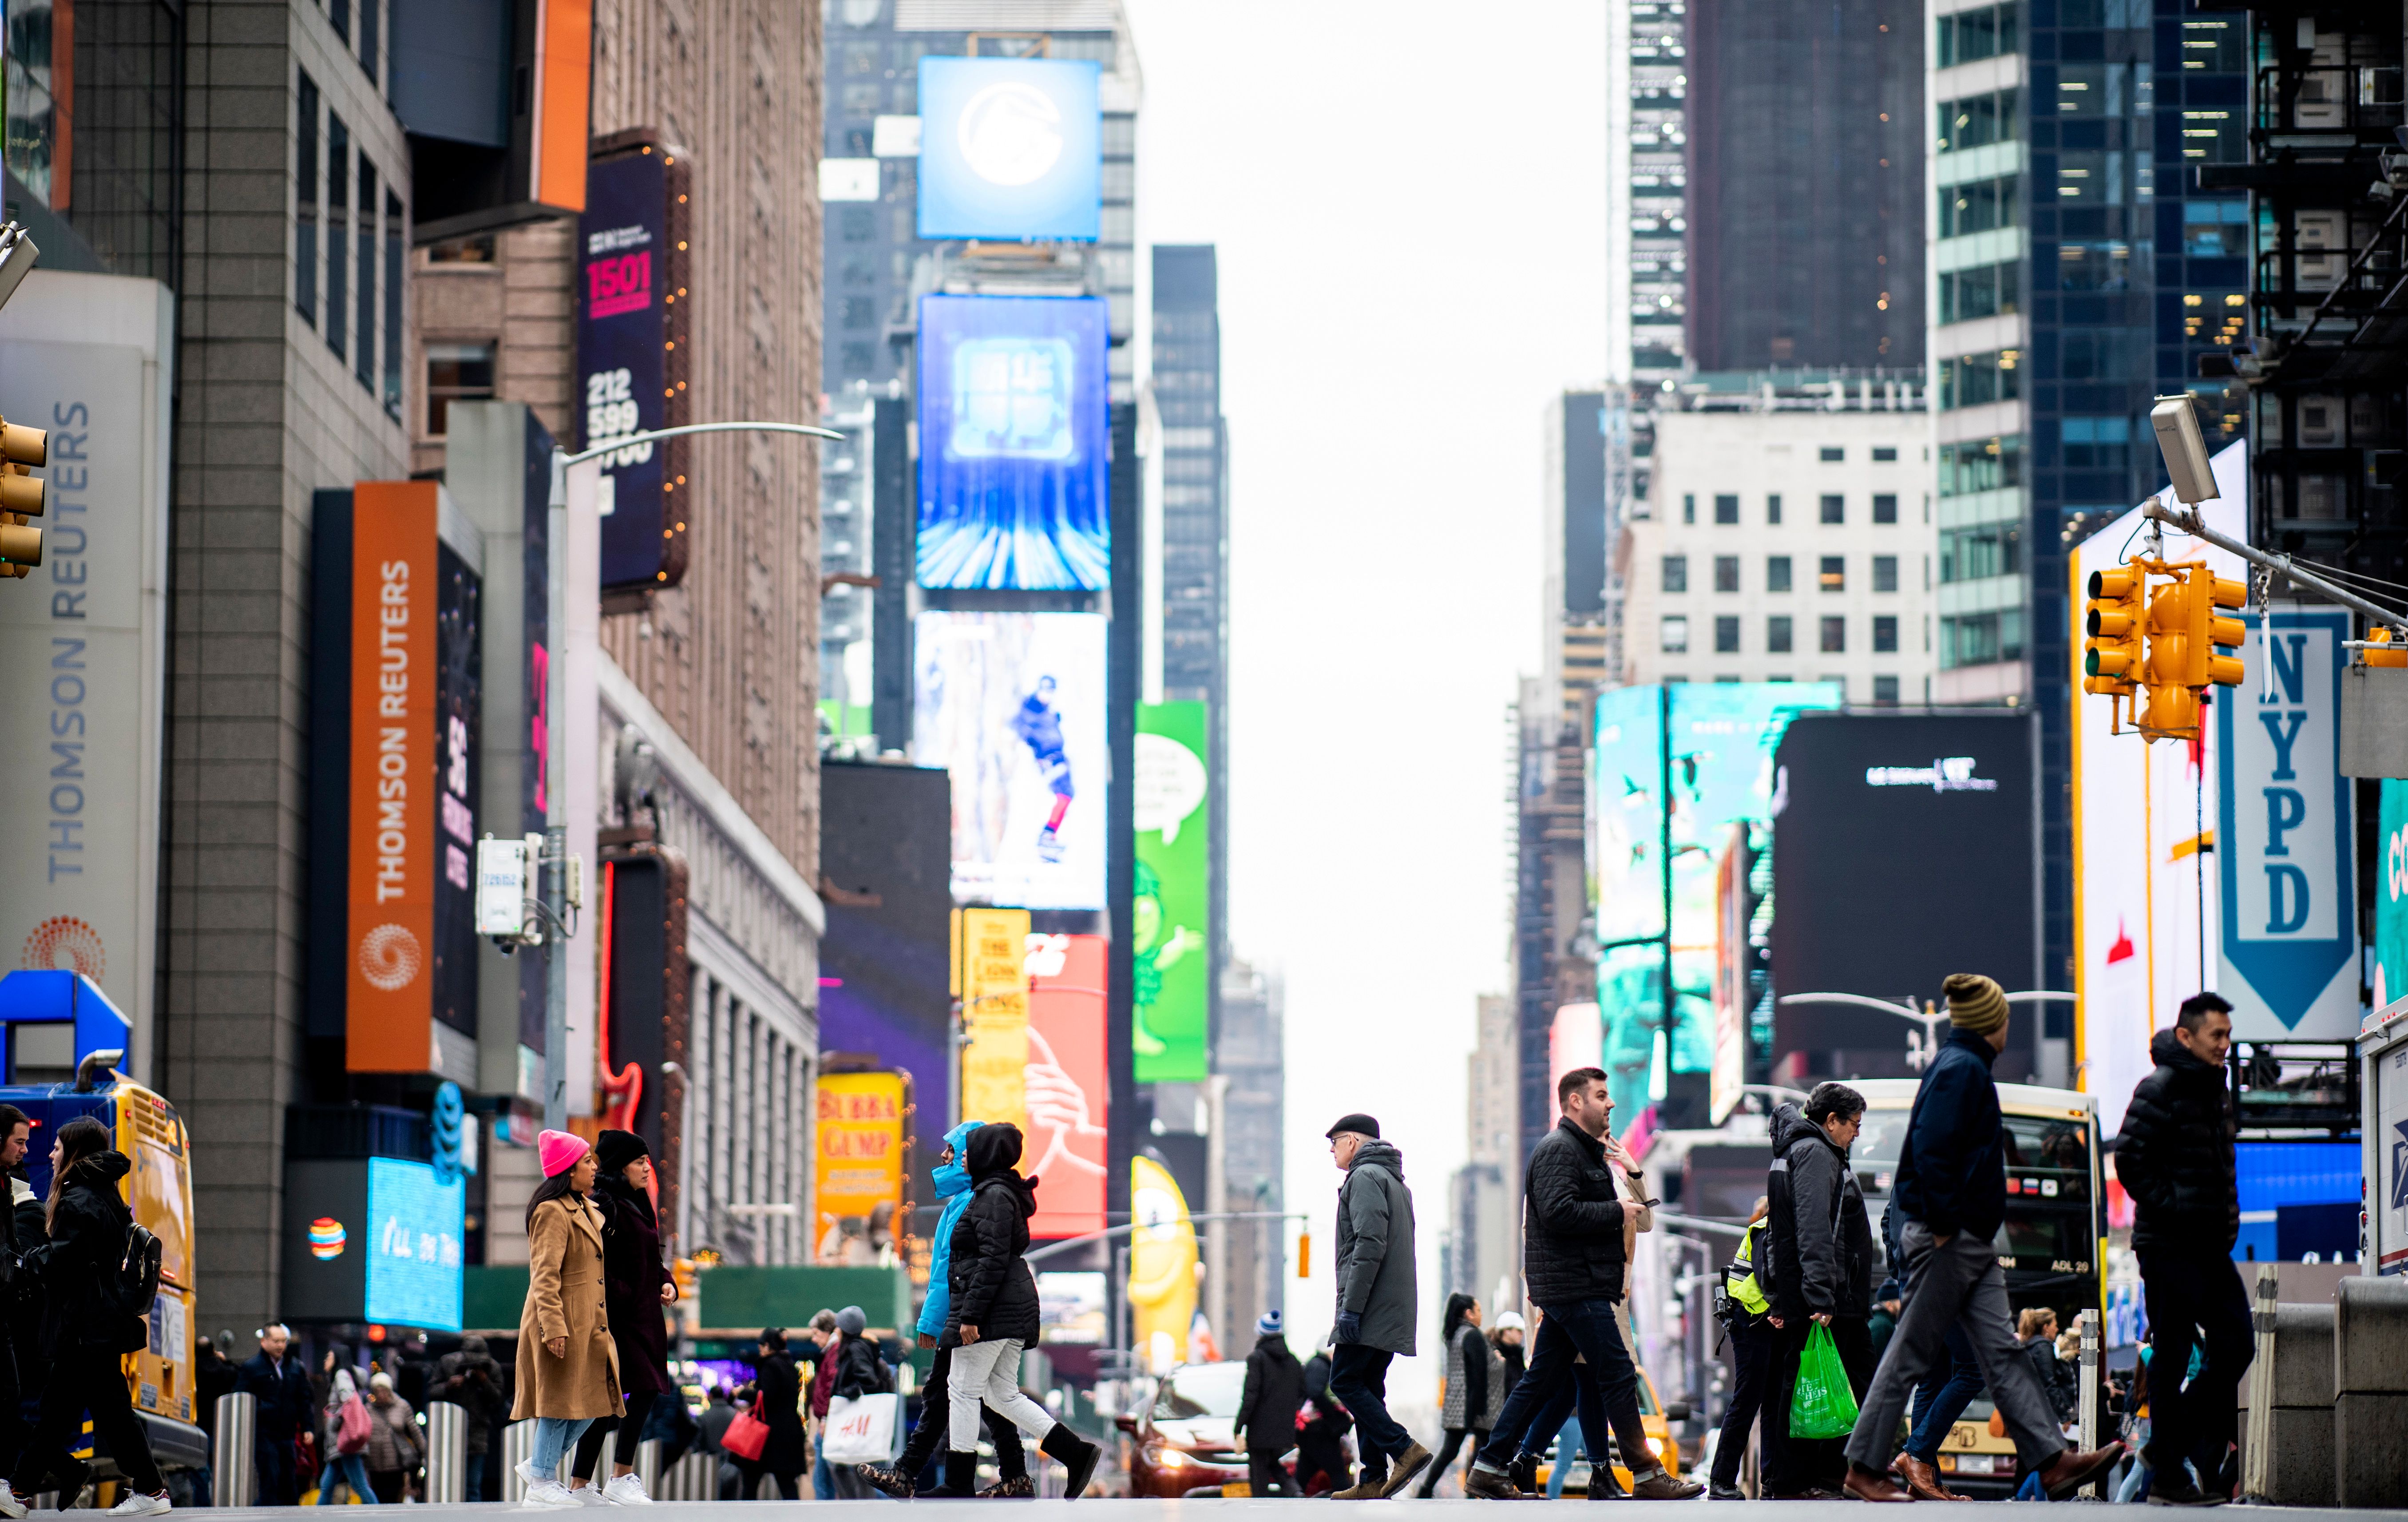 A crowd of people walking across 42nd Street in Times Square on January 14, 2020